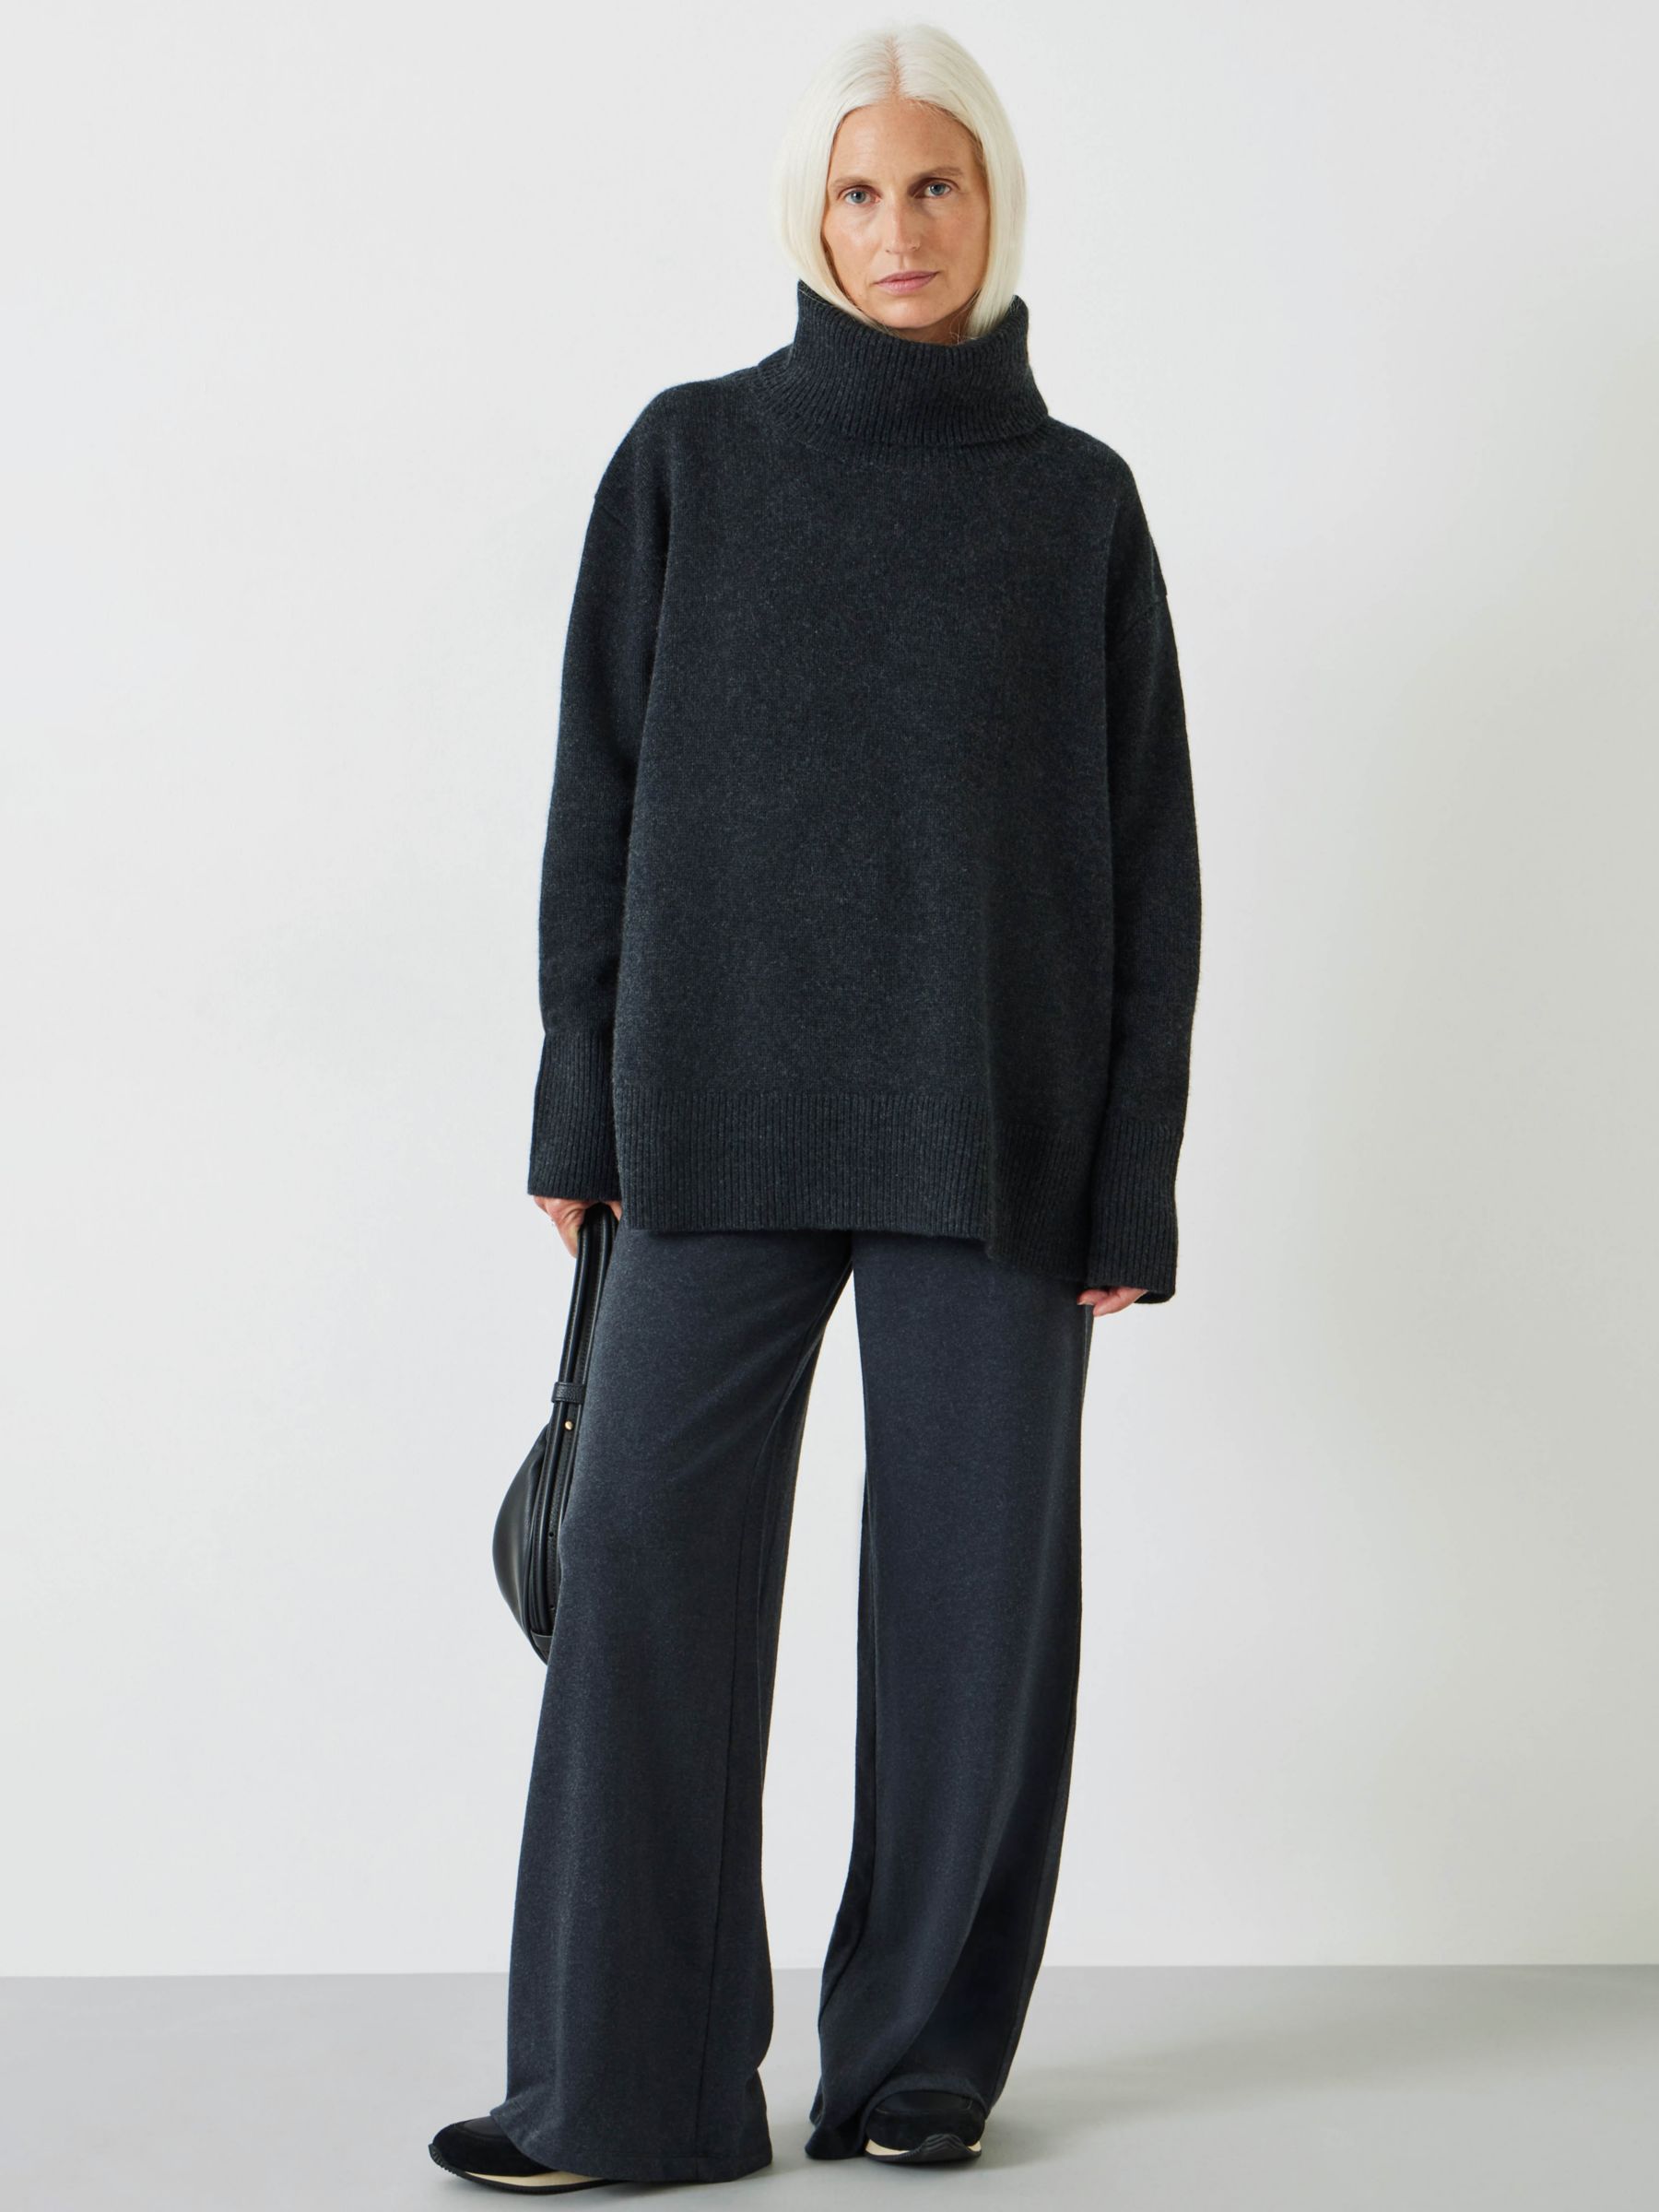 HUSH Ailey Wide Leg Jersey Trousers, Charcoal Marl at John Lewis & Partners